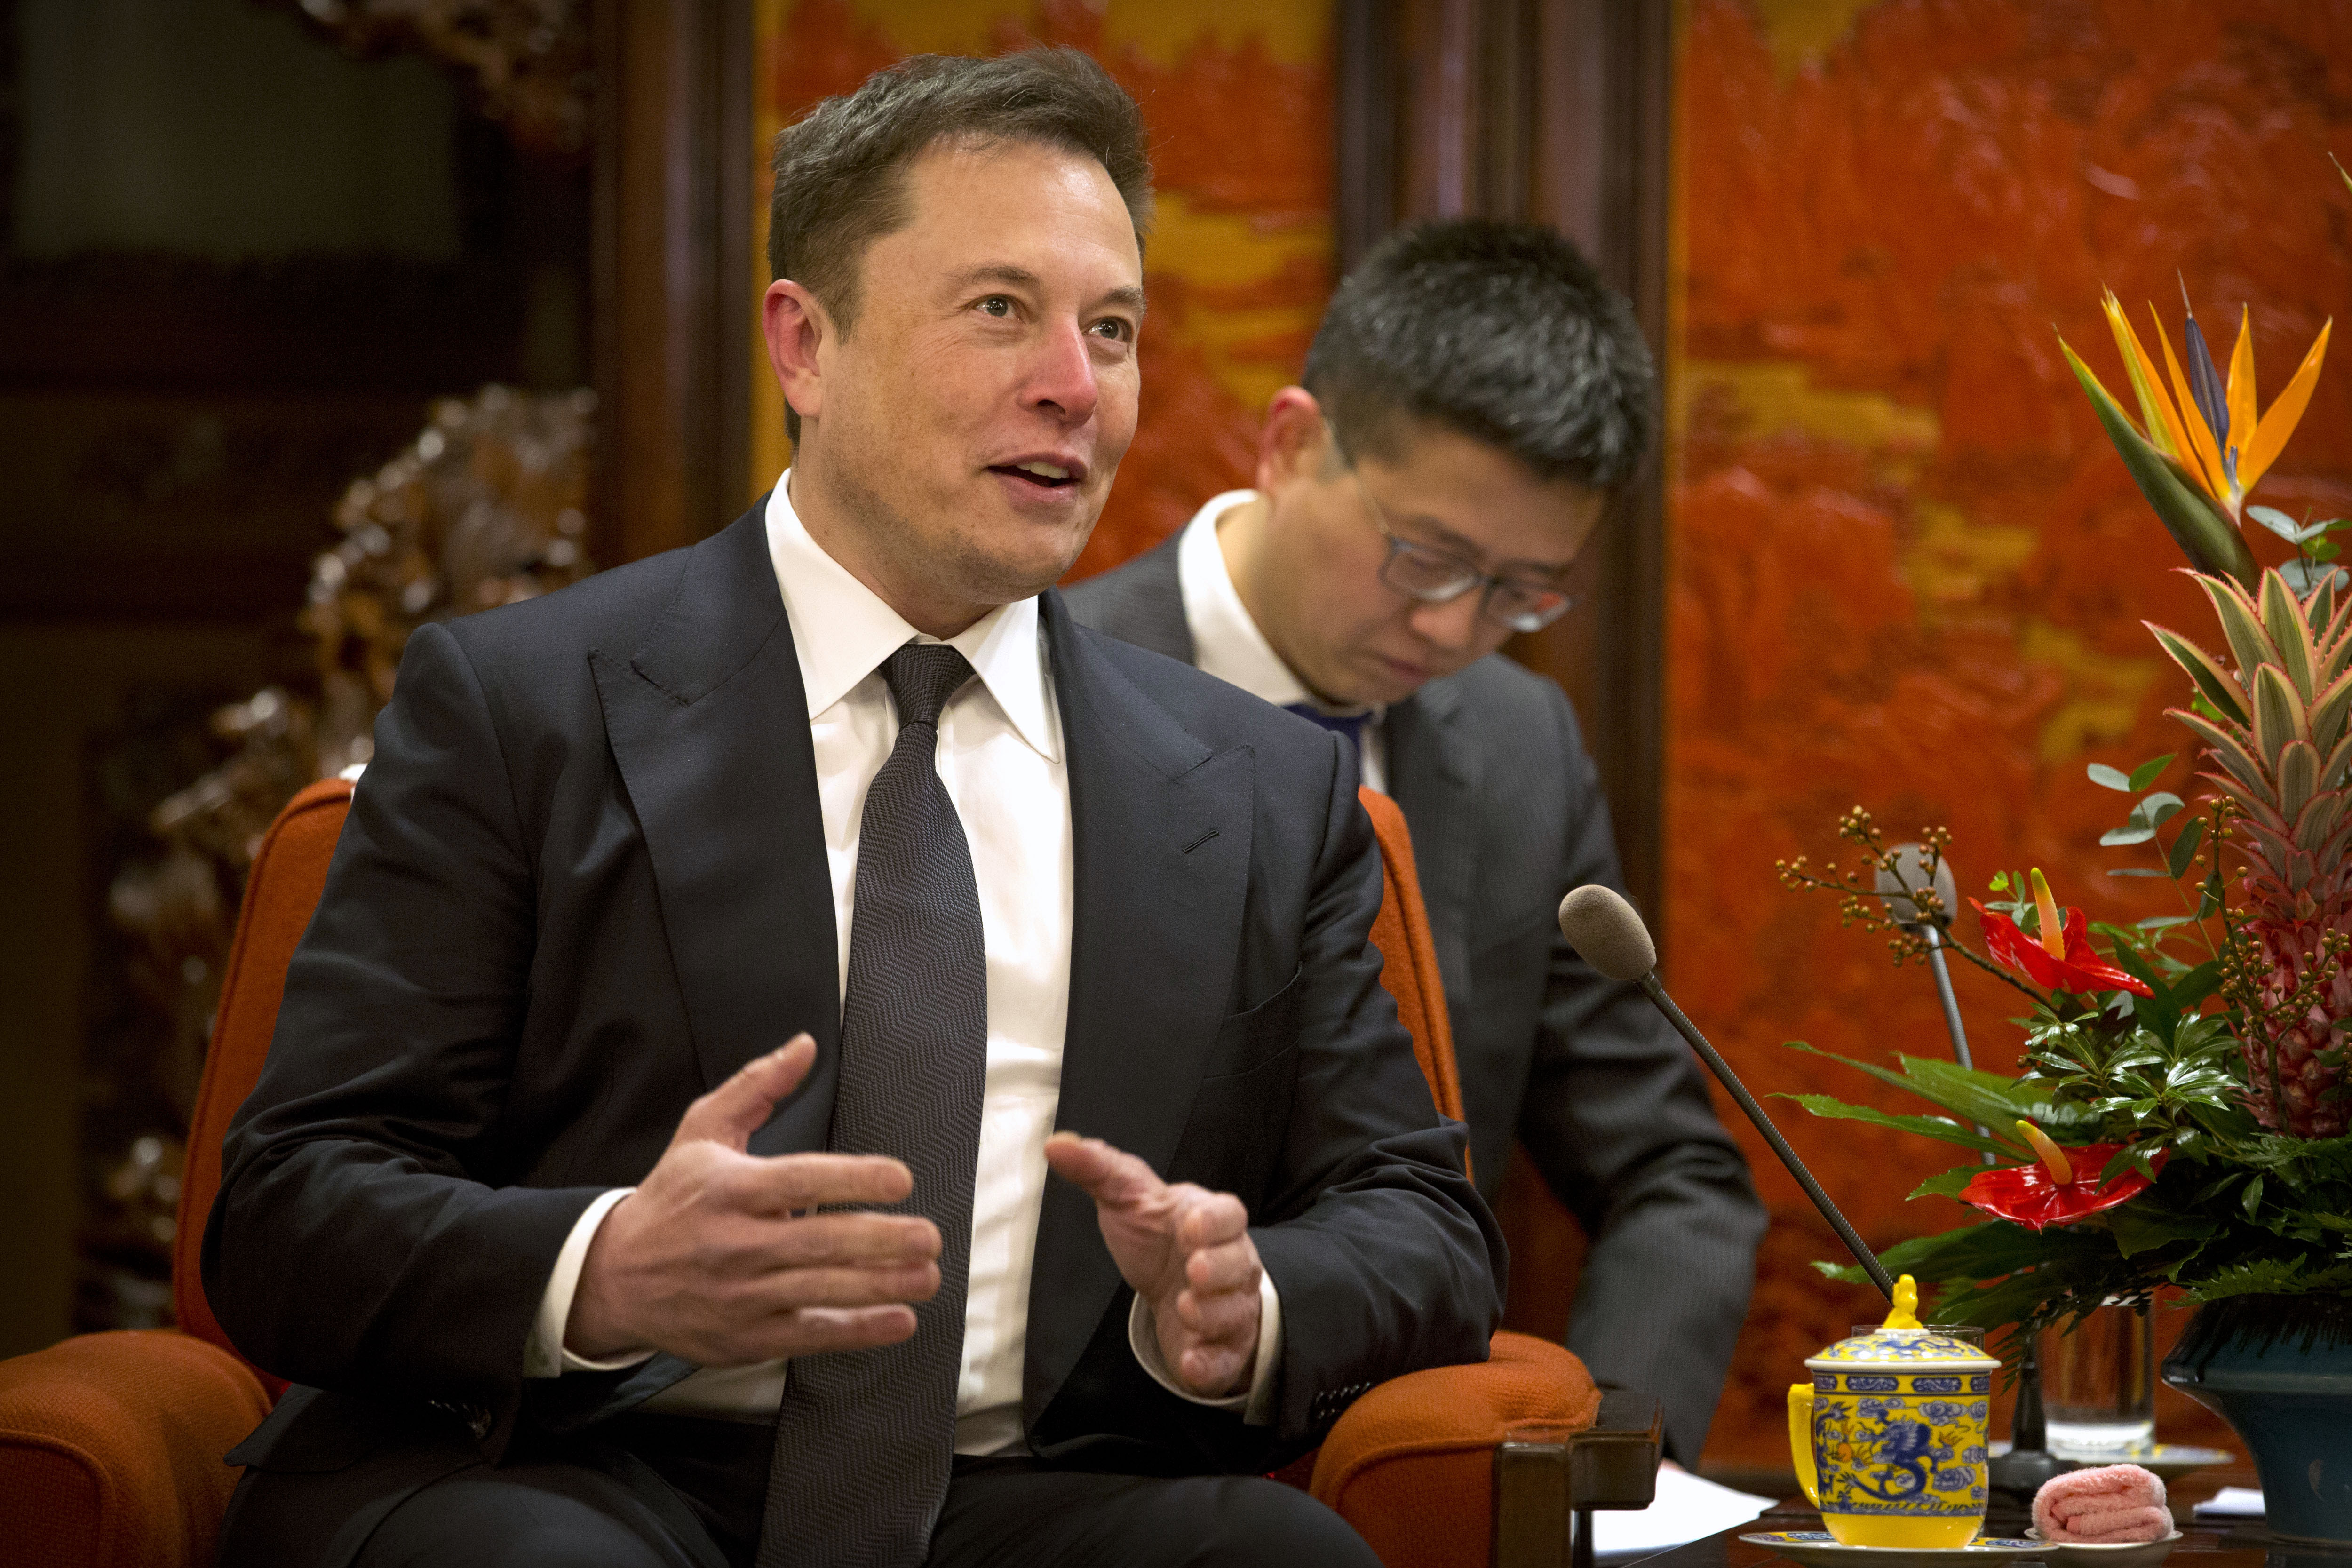 Tesla CEO Elon Musk speaks during a meeting with Chinese Premier Li Keqiang.